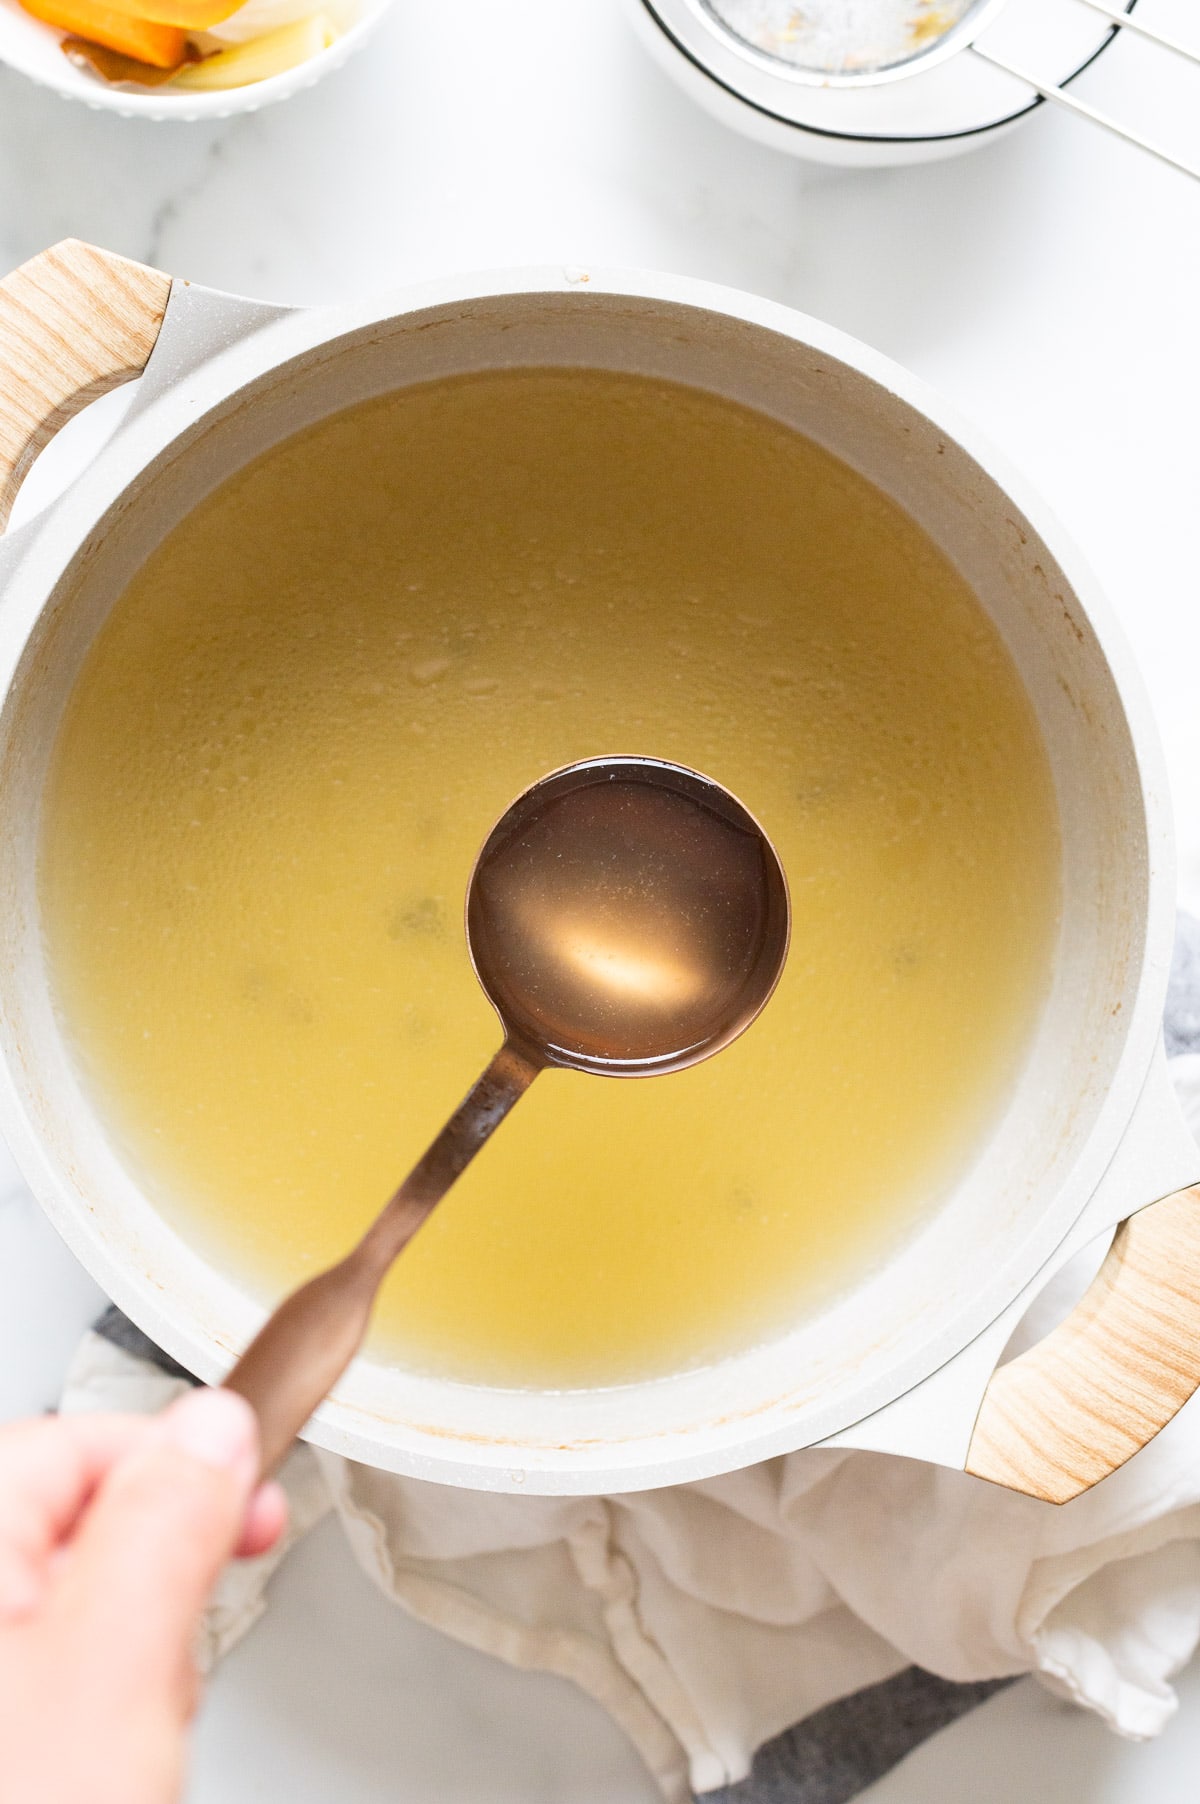 Person holding a ladle full of chicken broth above the pot with more broth.